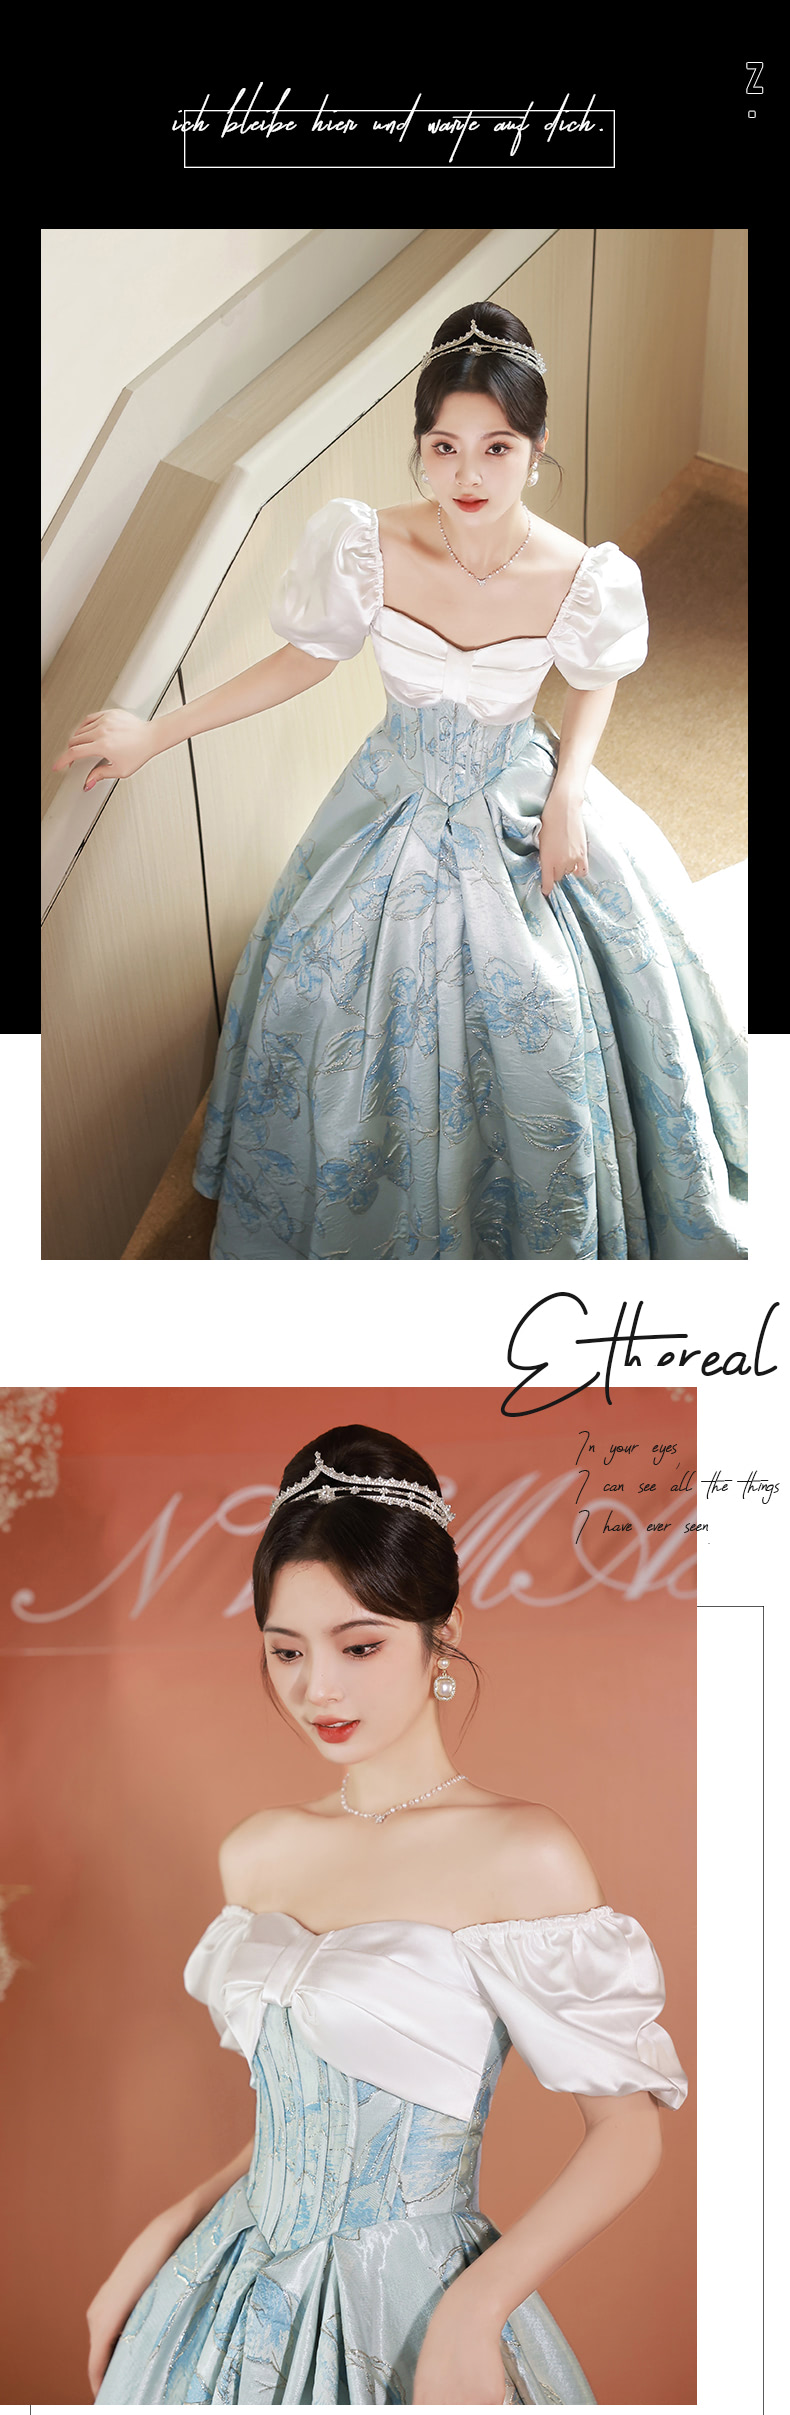 A-Line-Formal-Ball-Gown-Evening-Prom-Party-Maxi-Long-Dress11.jpg